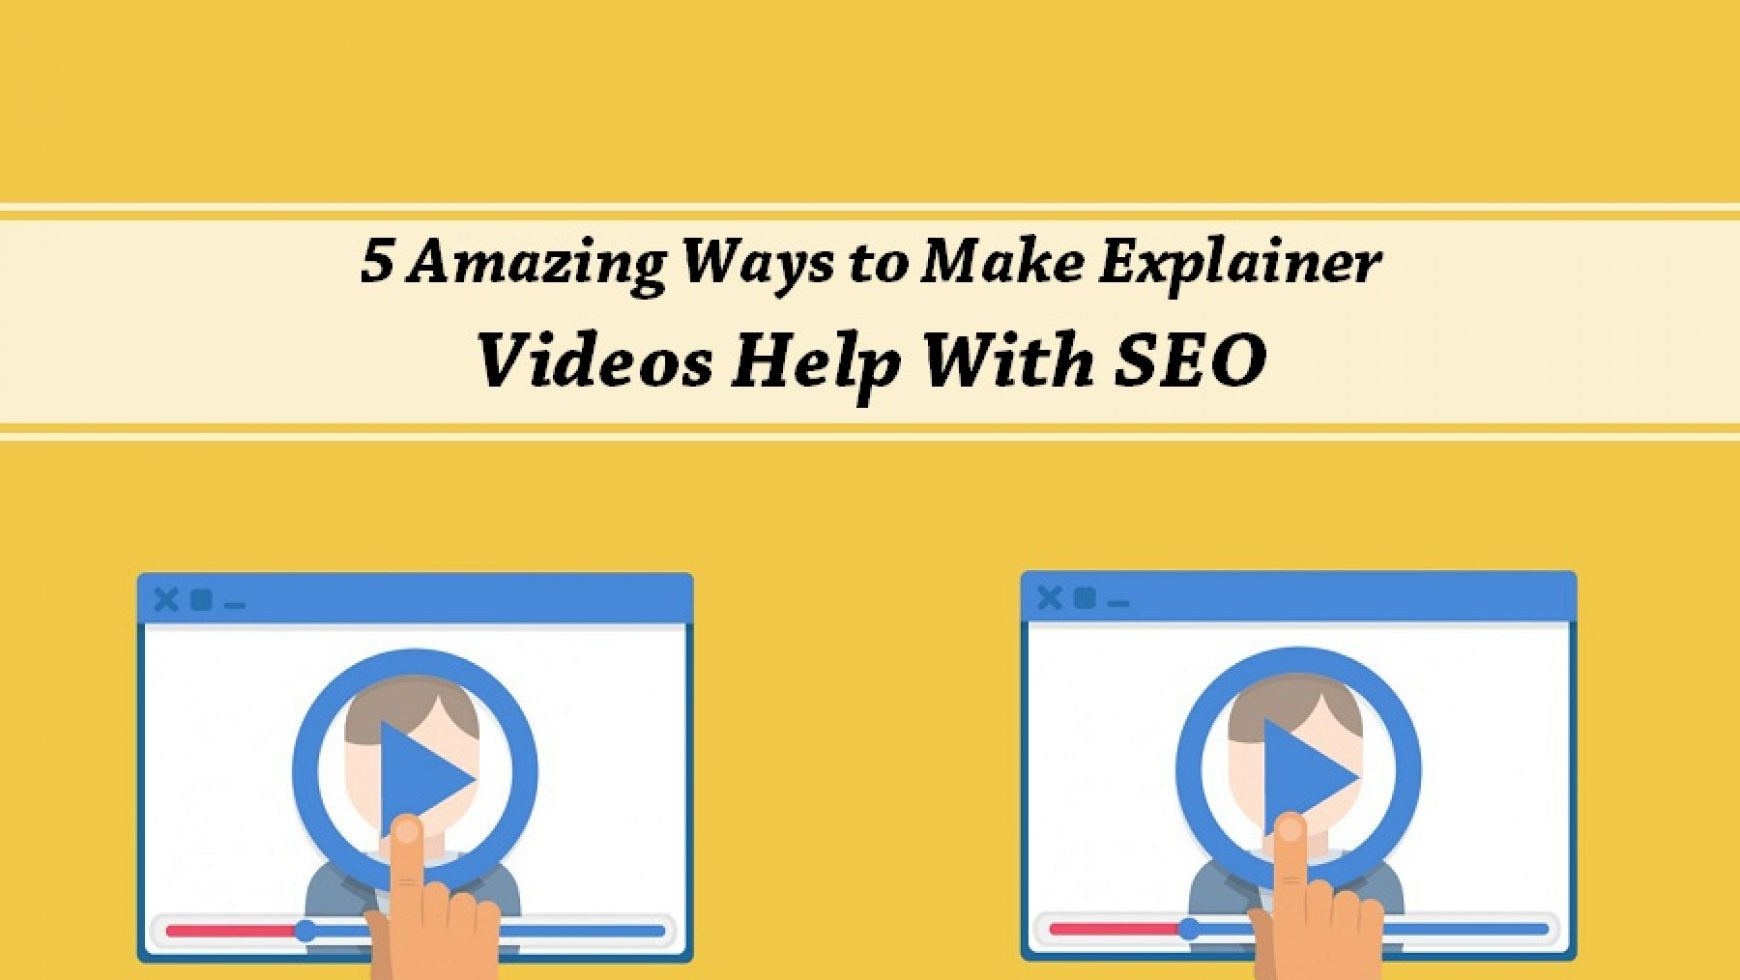 5 Amazing Ways to Make Explainer Videos Help With SEO